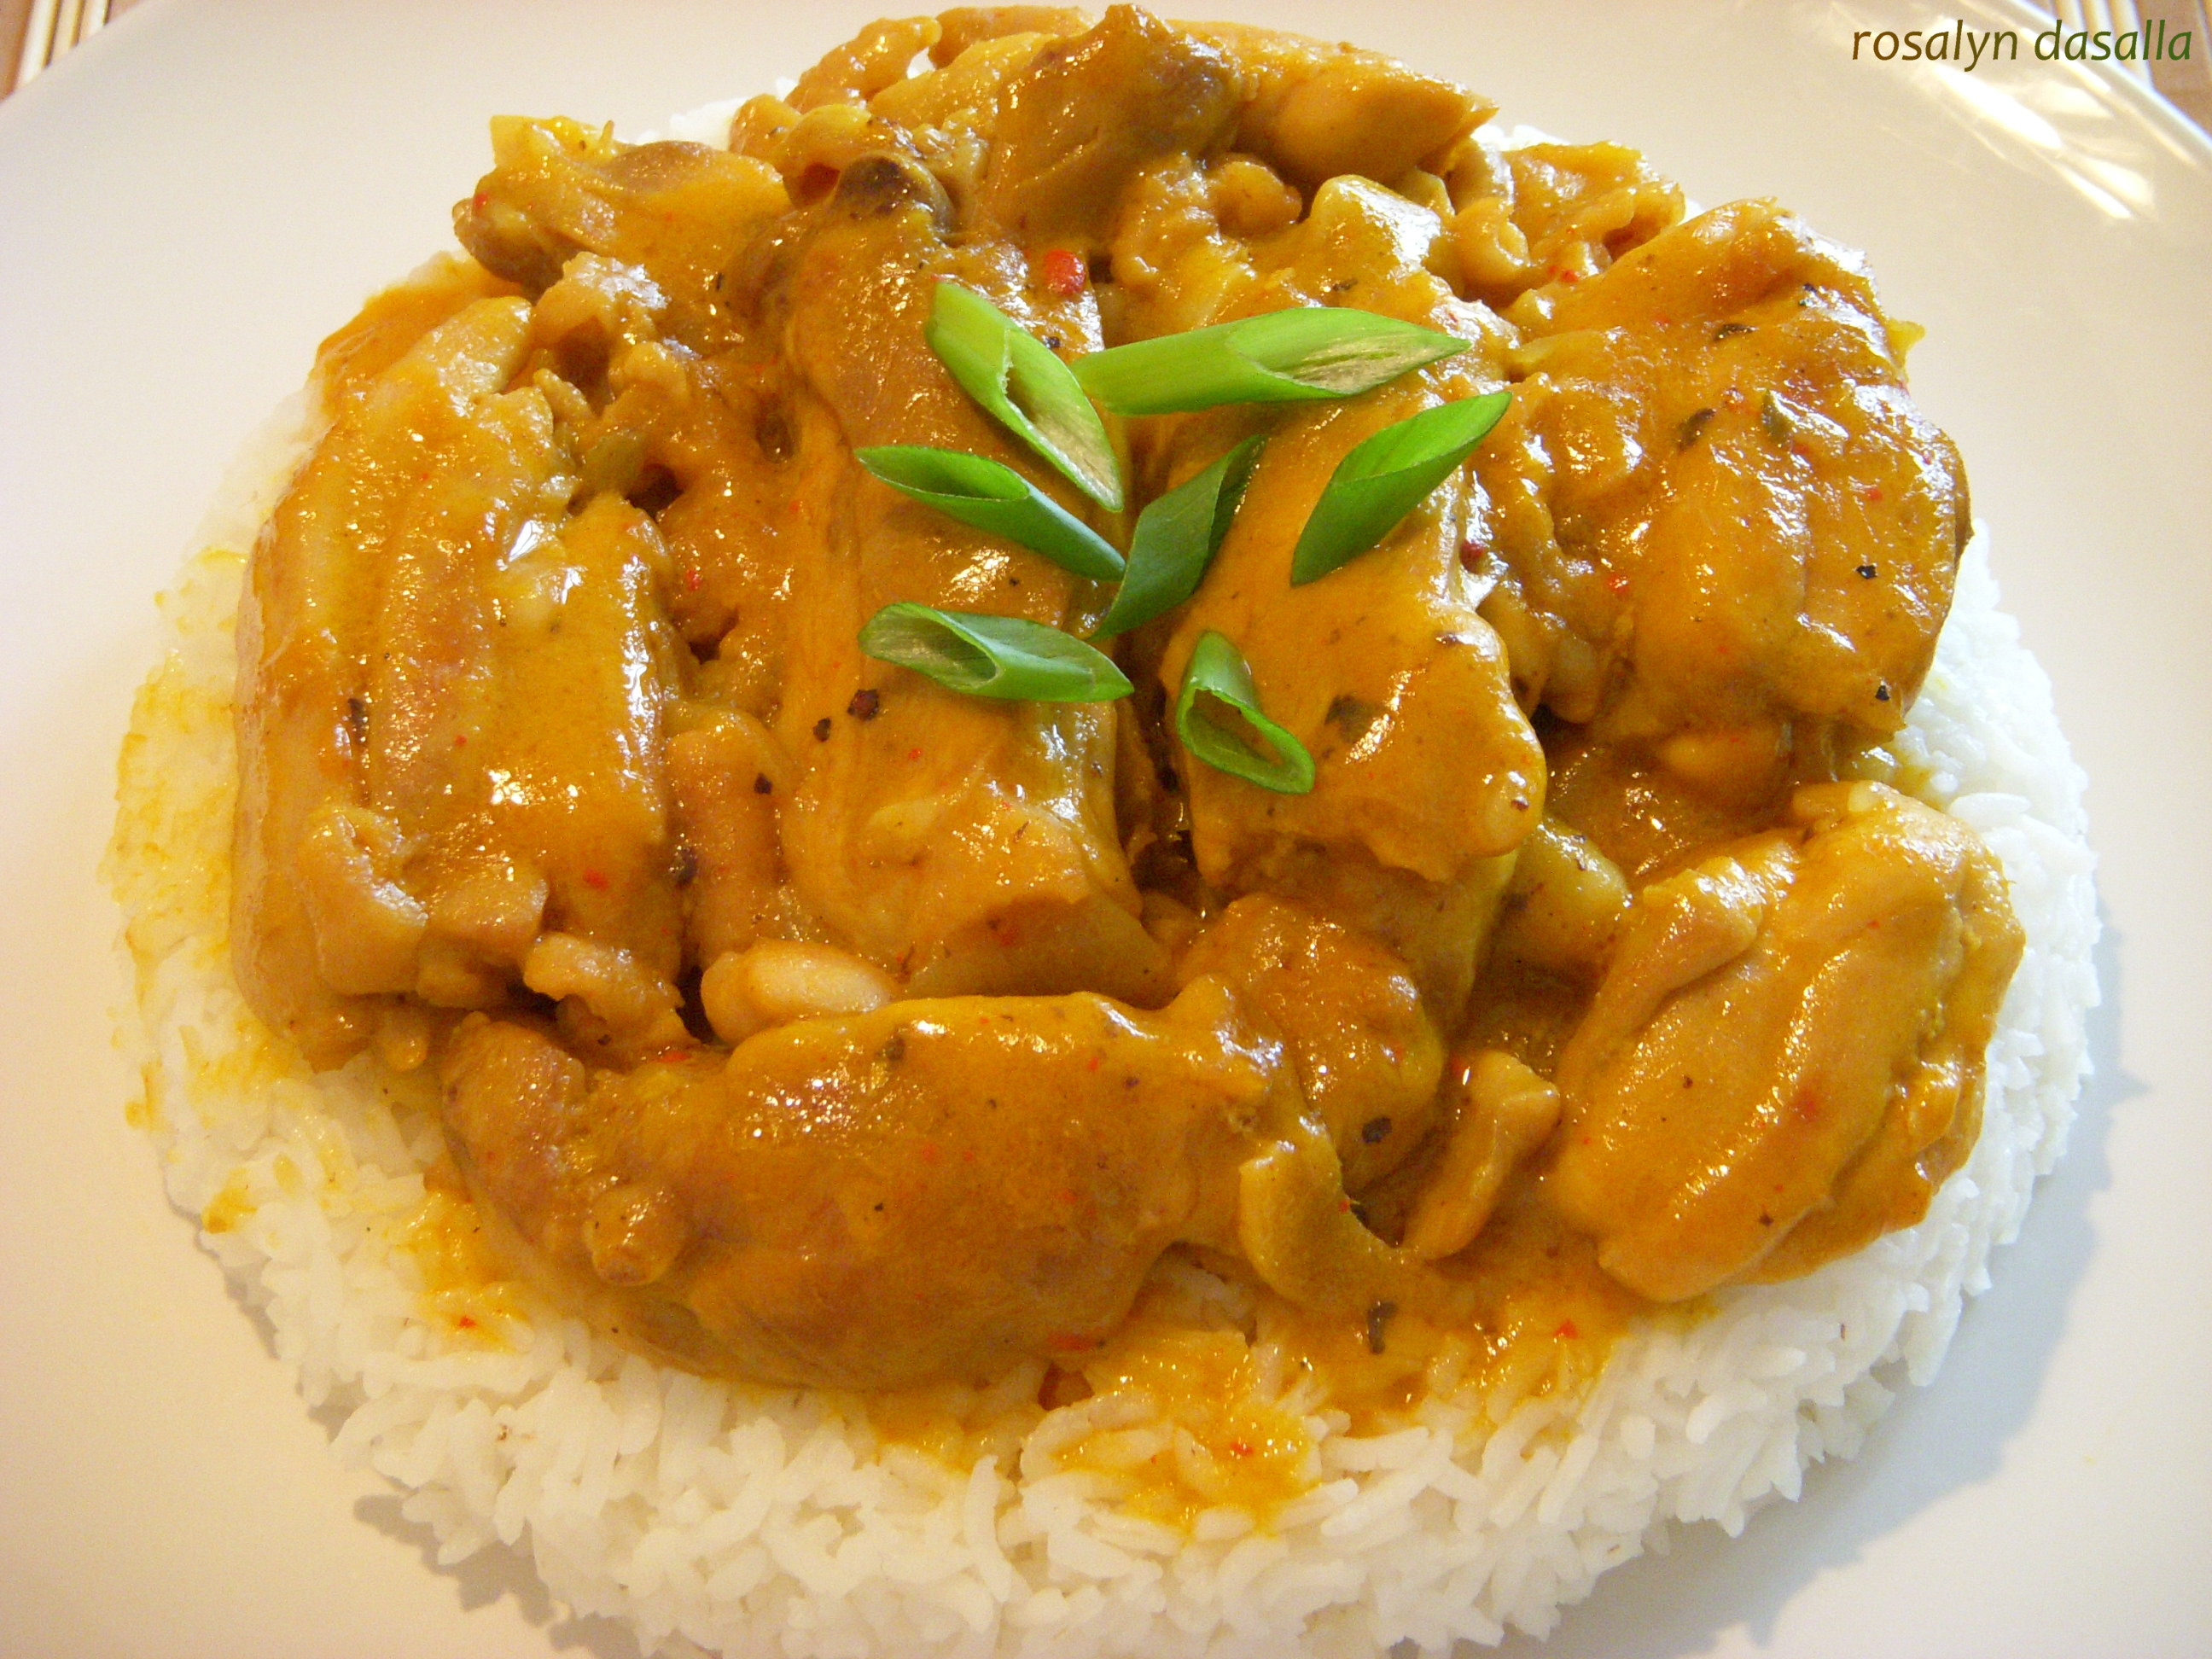 My homemade Indian Spiced Chicken Curry | Andrea de Michaelis Foodie Blog